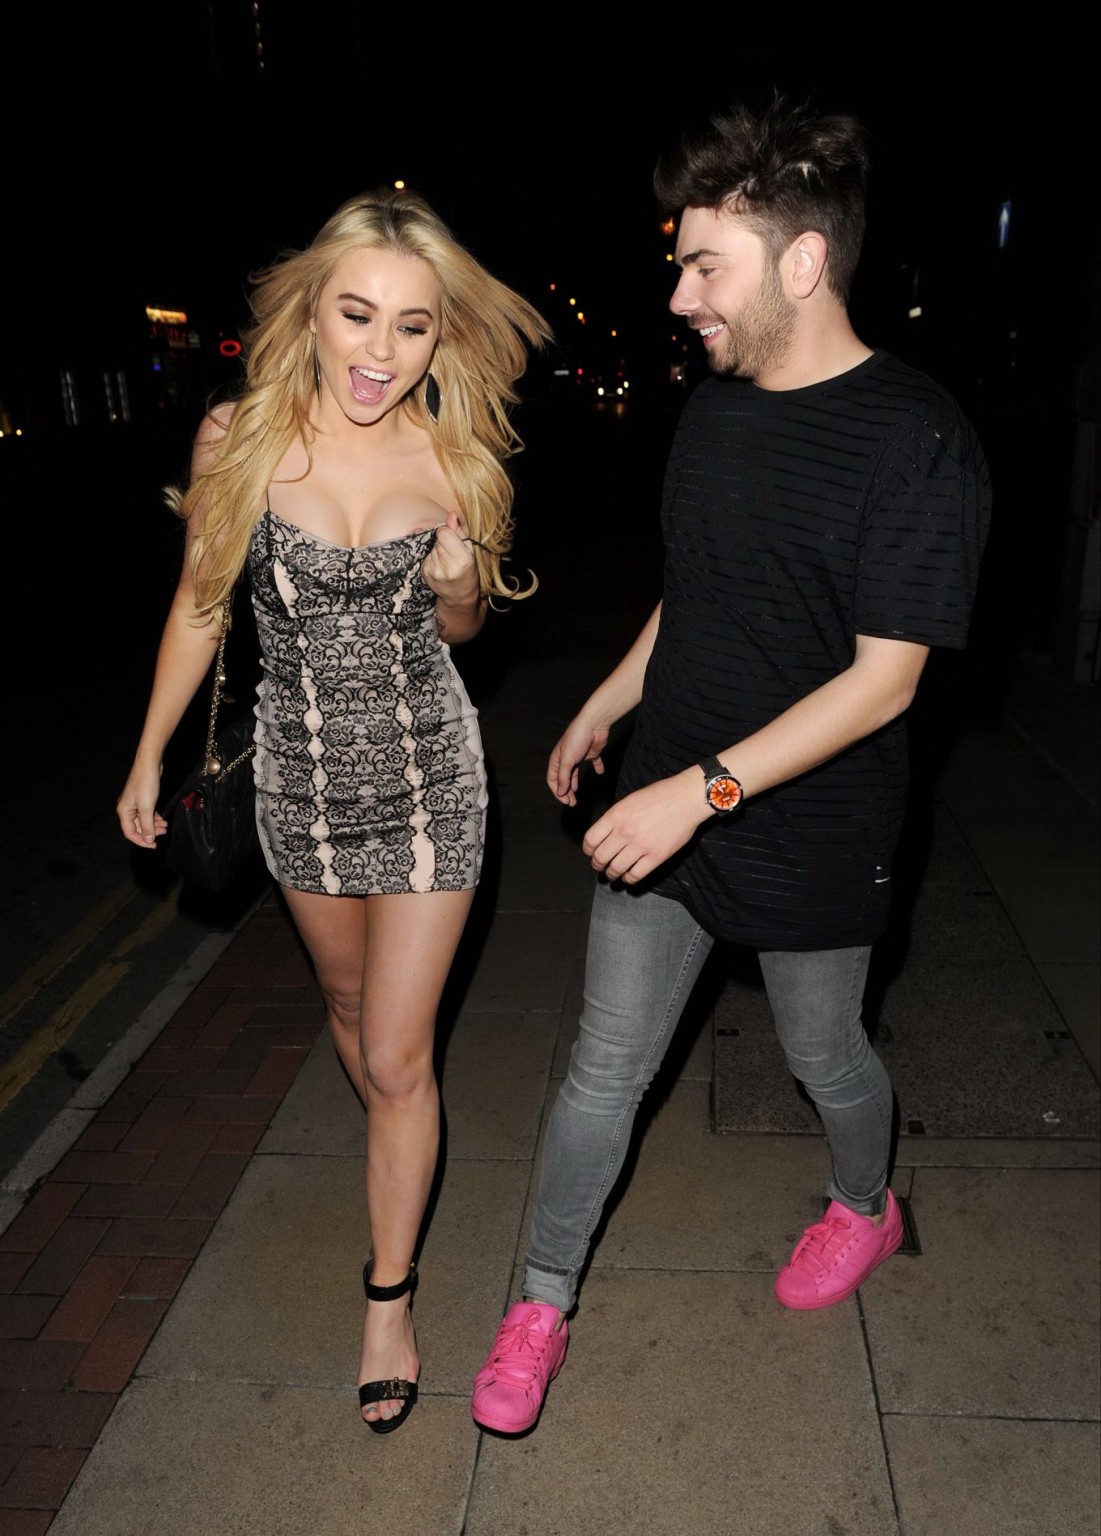 Melissa Reeves showing off her boobs and bare ass on a drunken night out in Manc #75164756